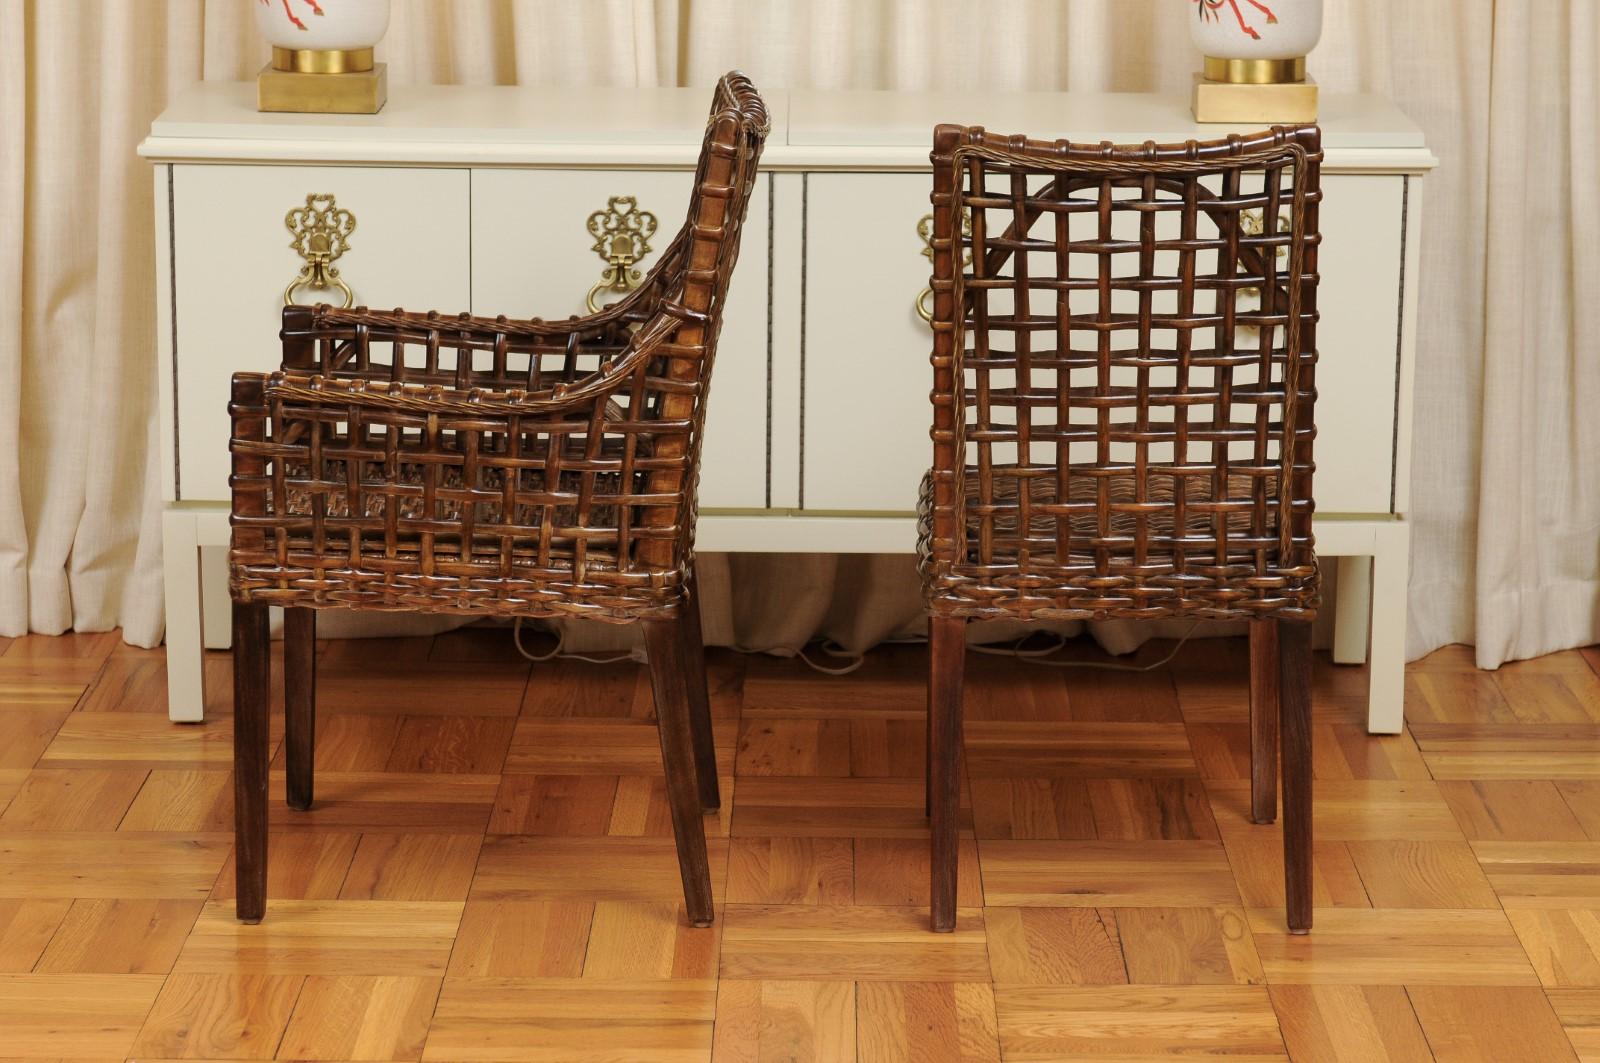 Superb Set of 12 Cerused Mahogany and Cane Dining Chairs in Aged Tobacco For Sale 5